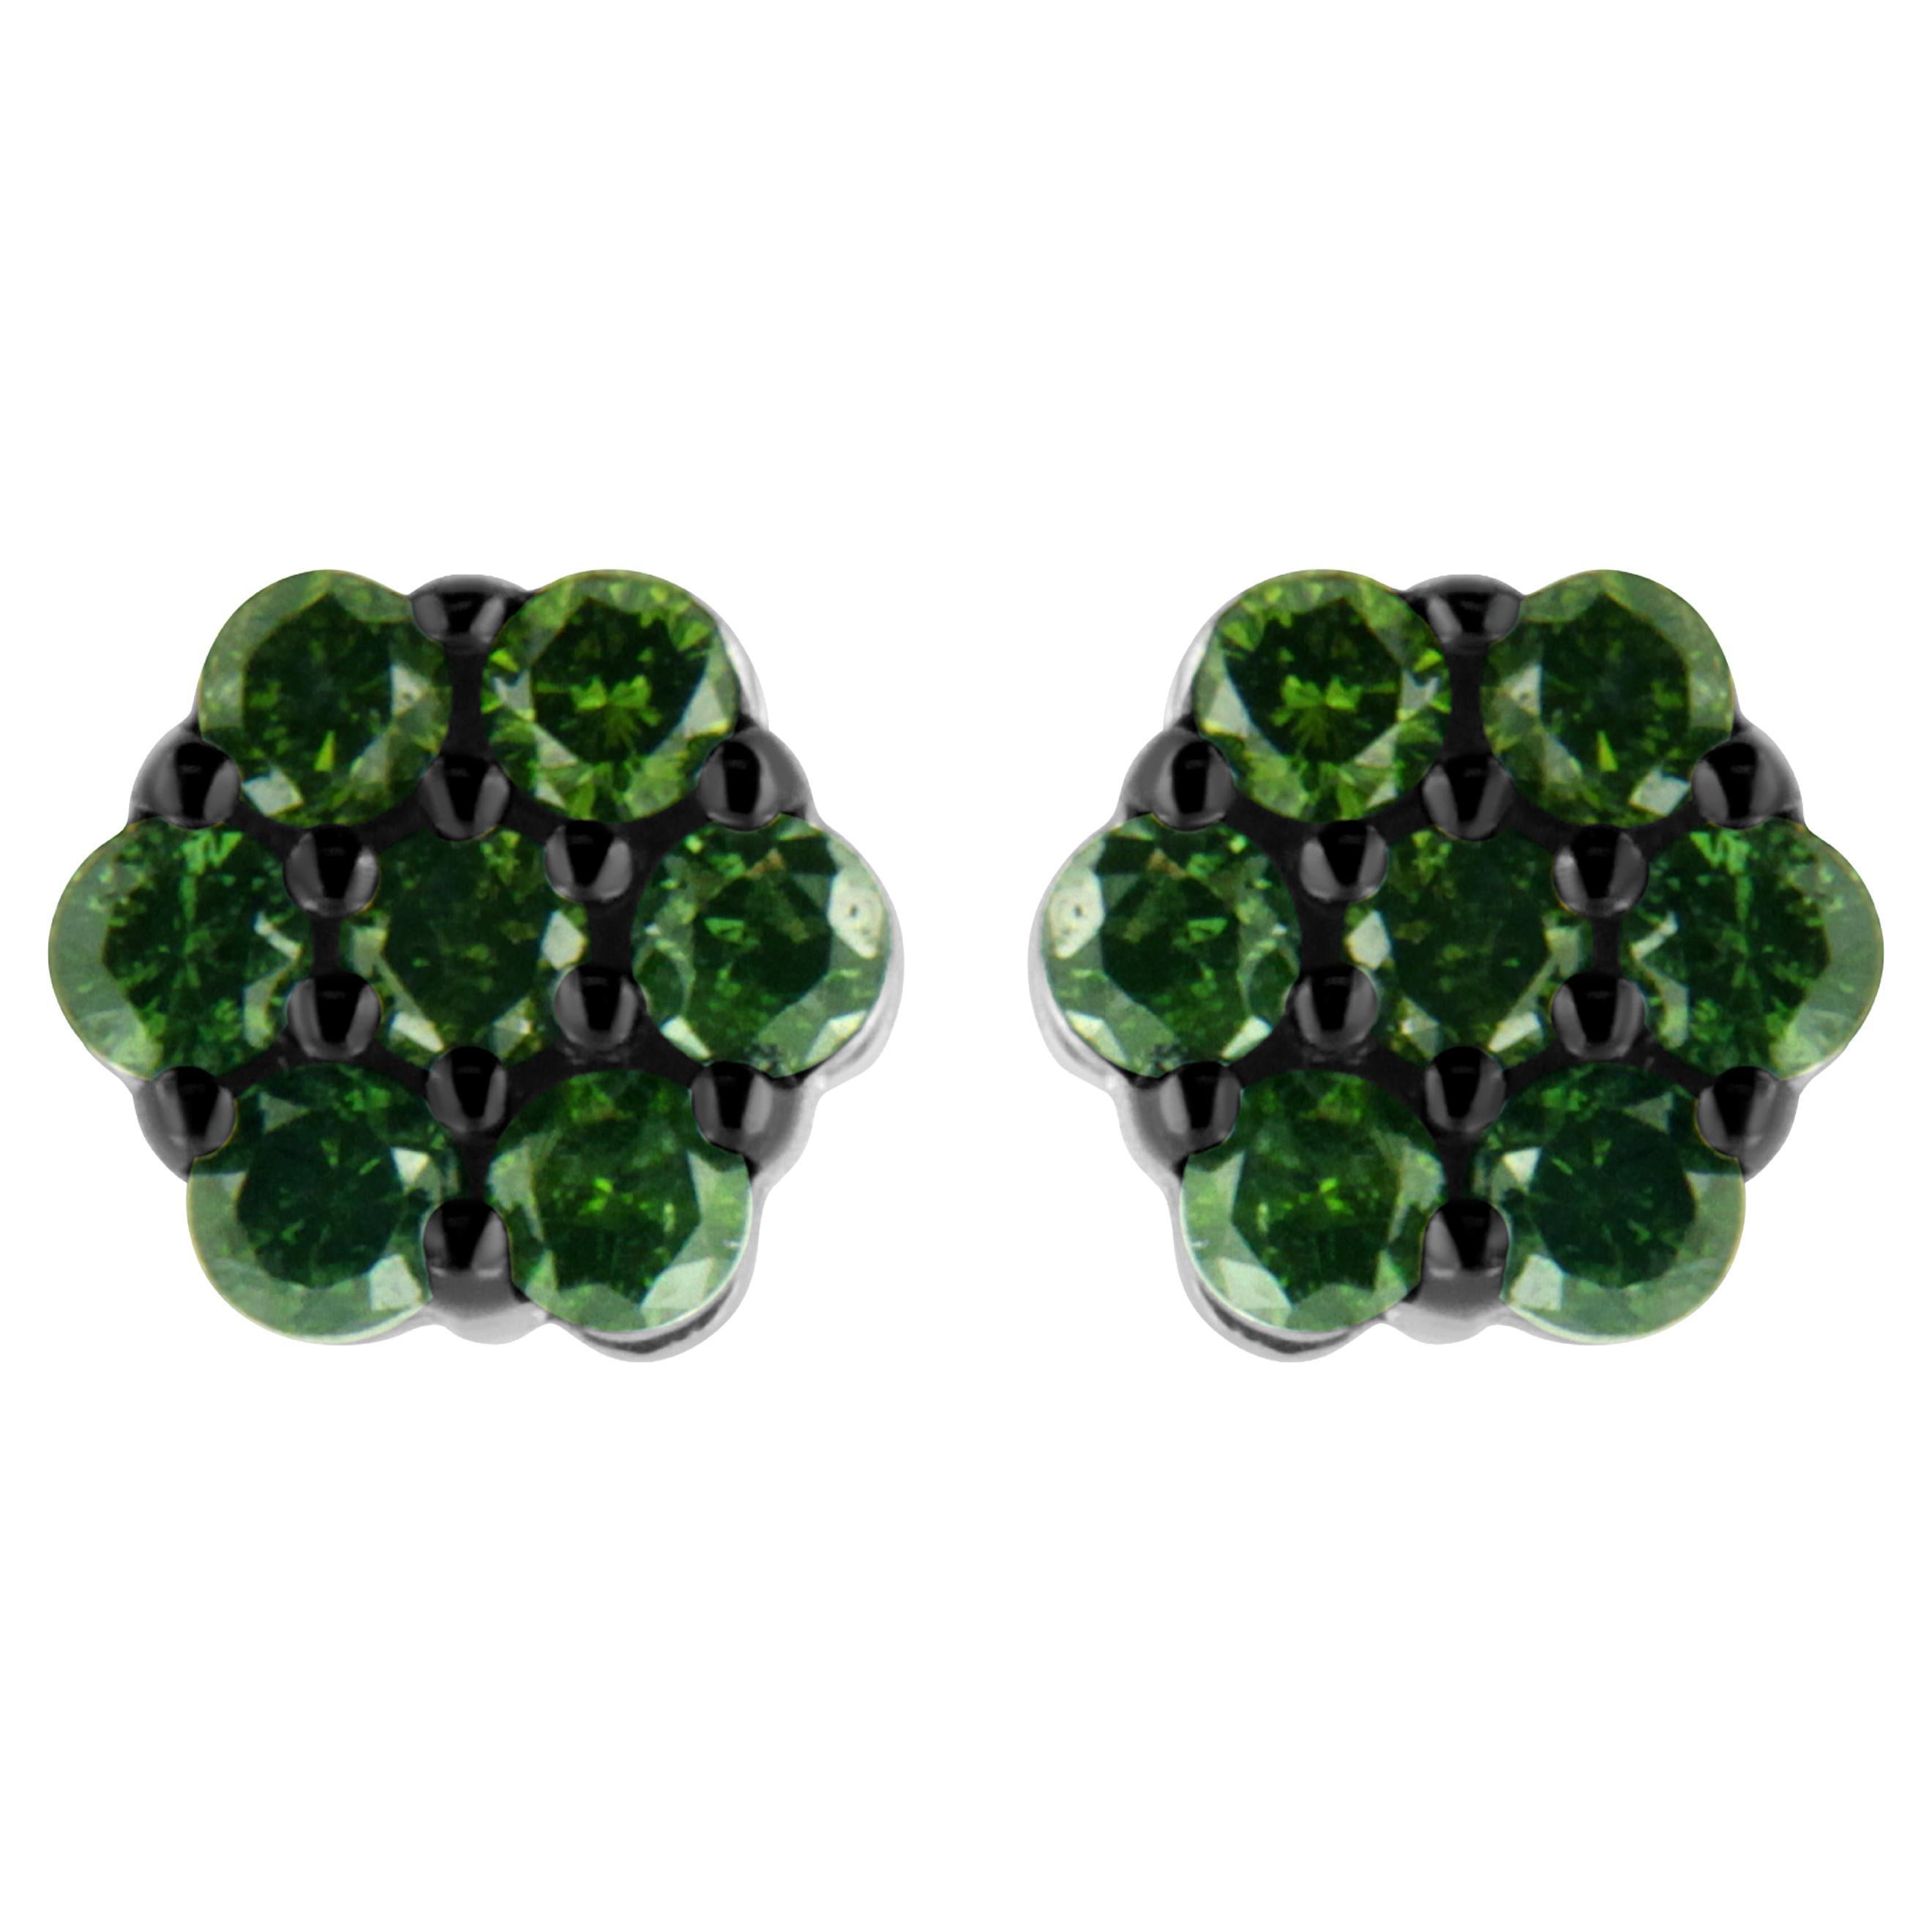 .925 Sterling Silver 2.0 Carat Treated Green Diamond Floral Cluster Stud Earring